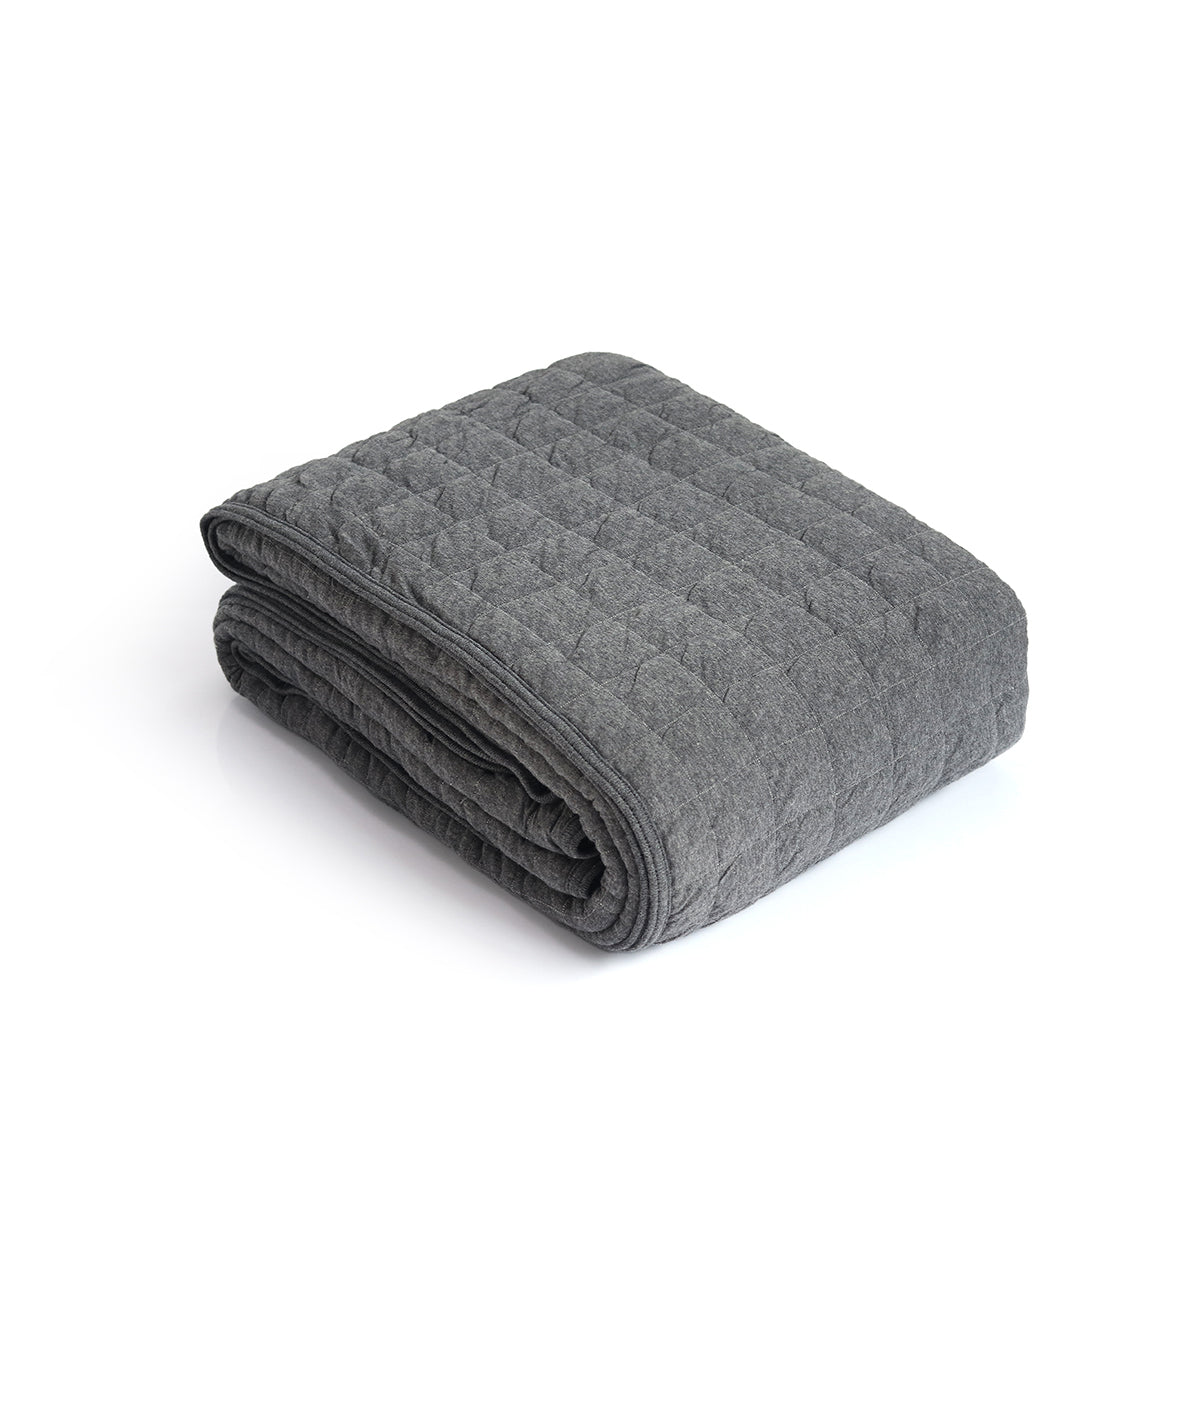 Square Check Cotton Knitted Light weight Quilted Blanket (Dark Grey Melange)